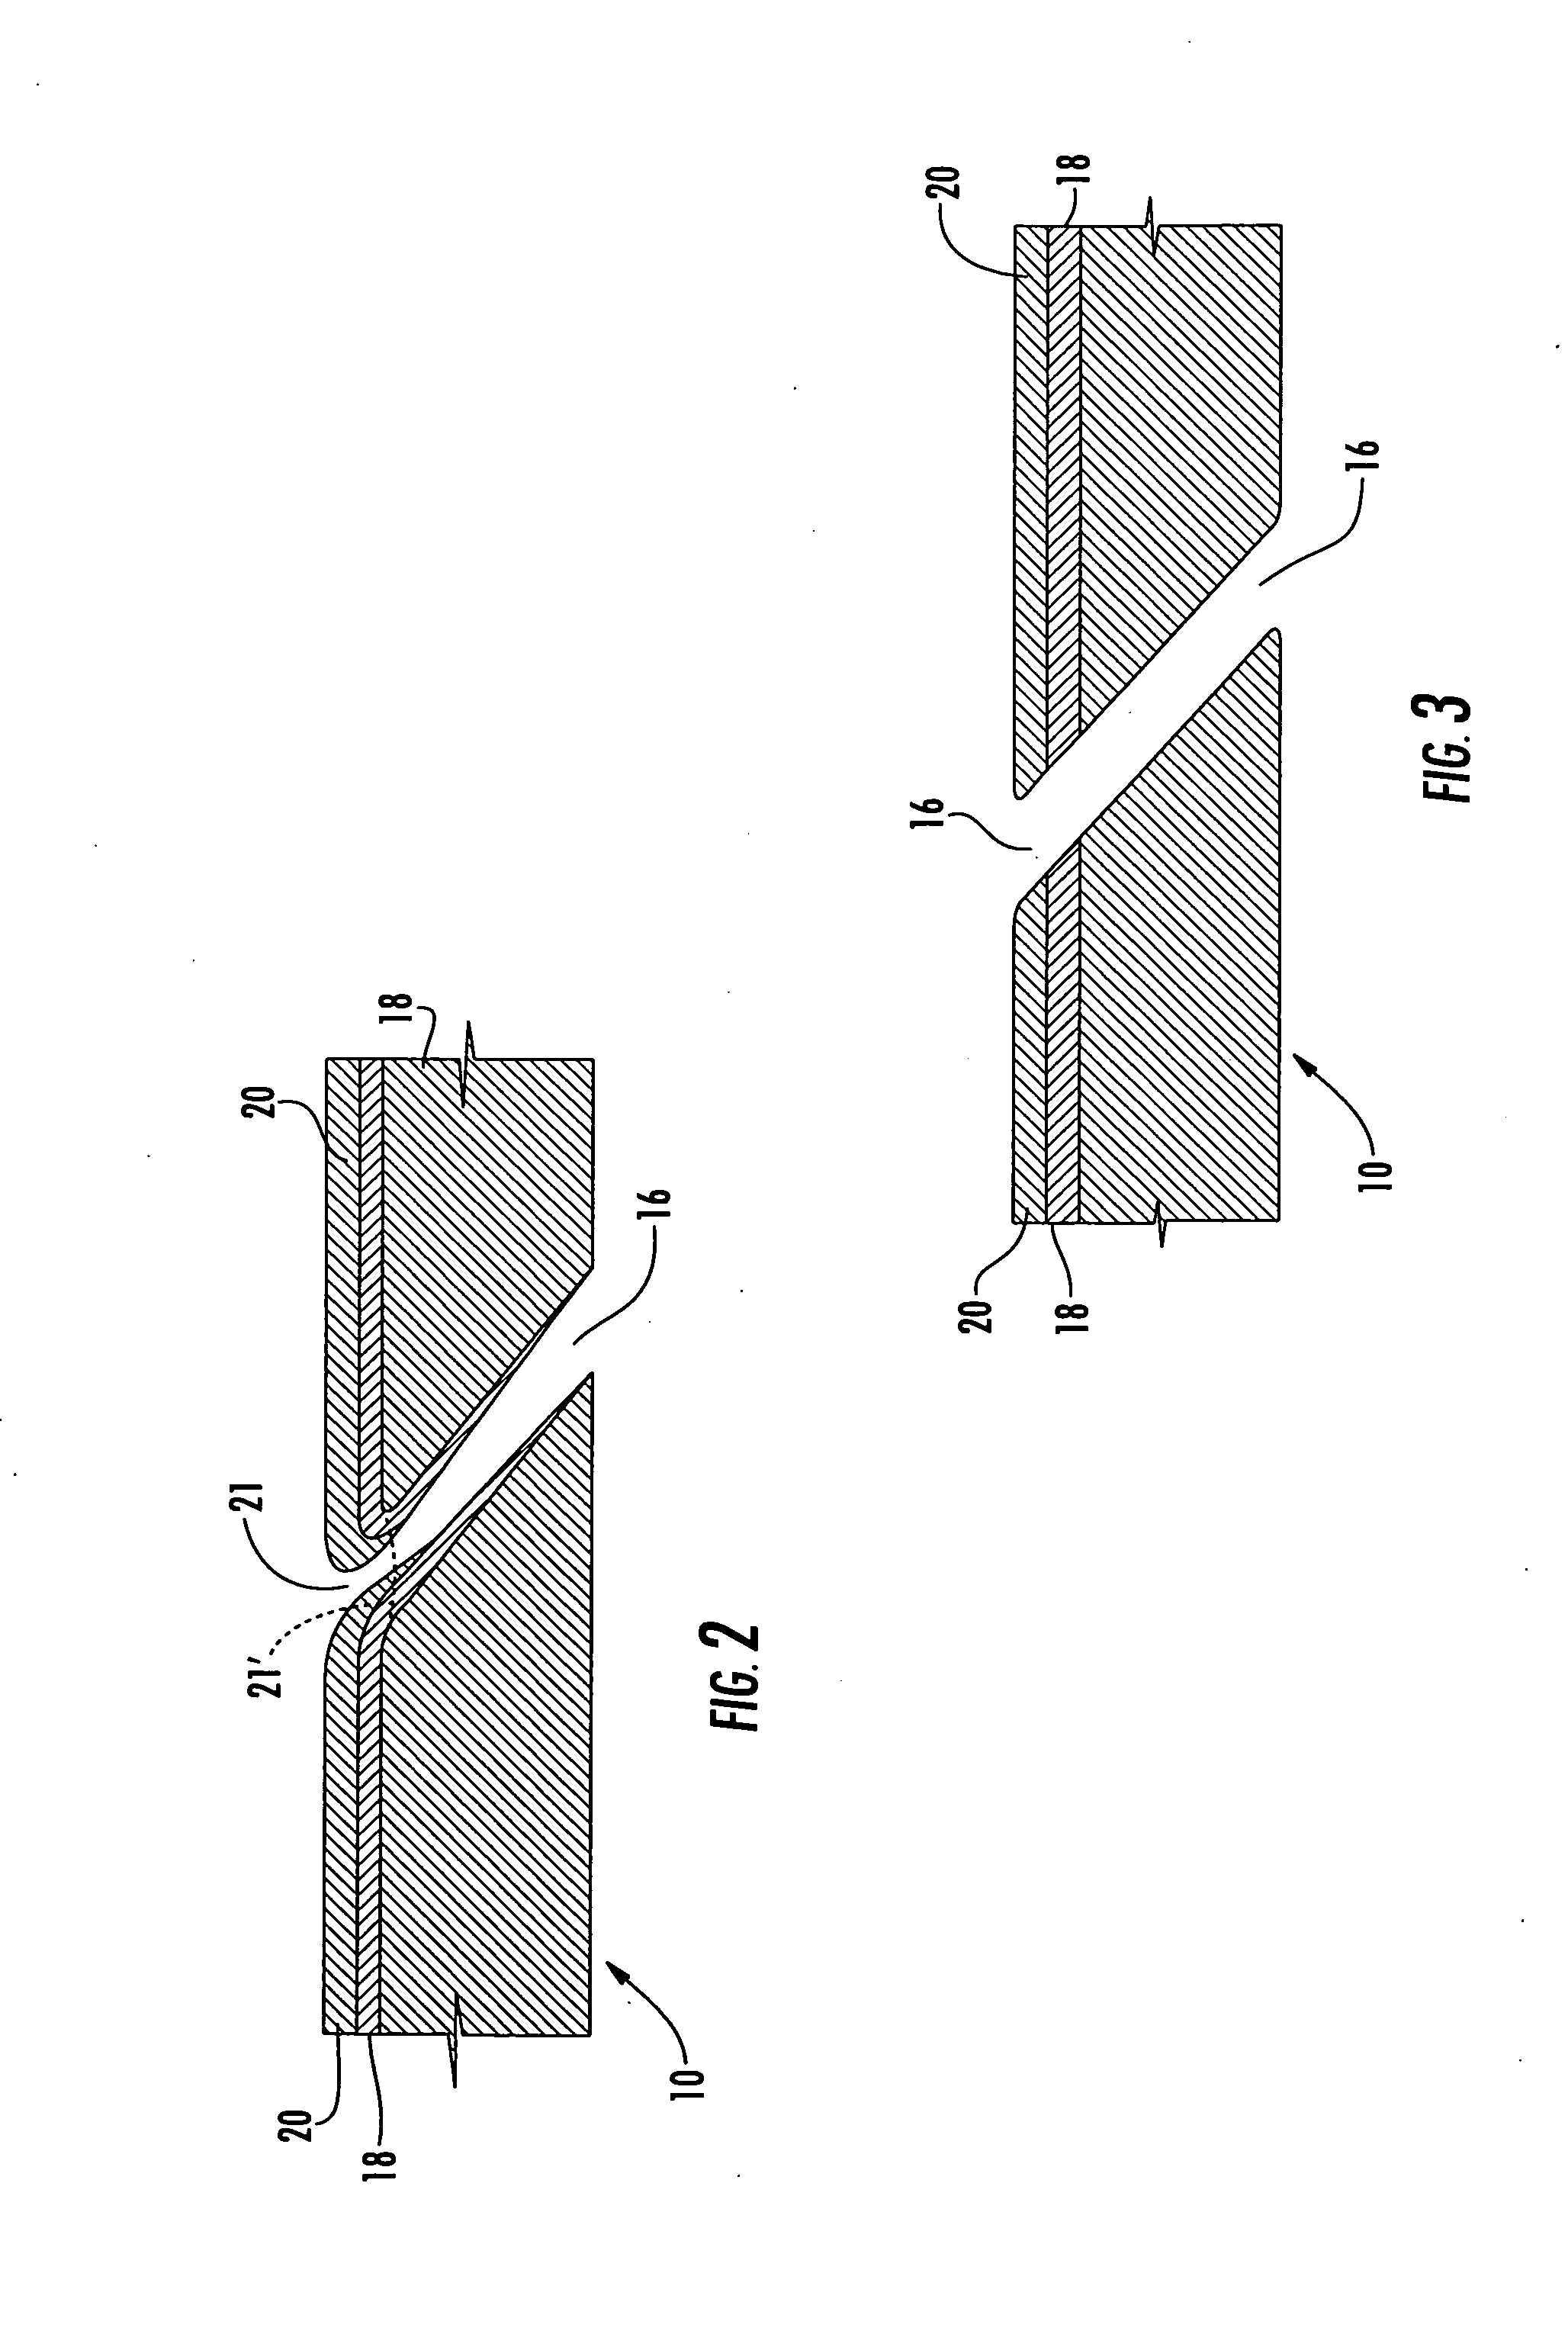 Method and apparatus for stripping holes in a metal substrate